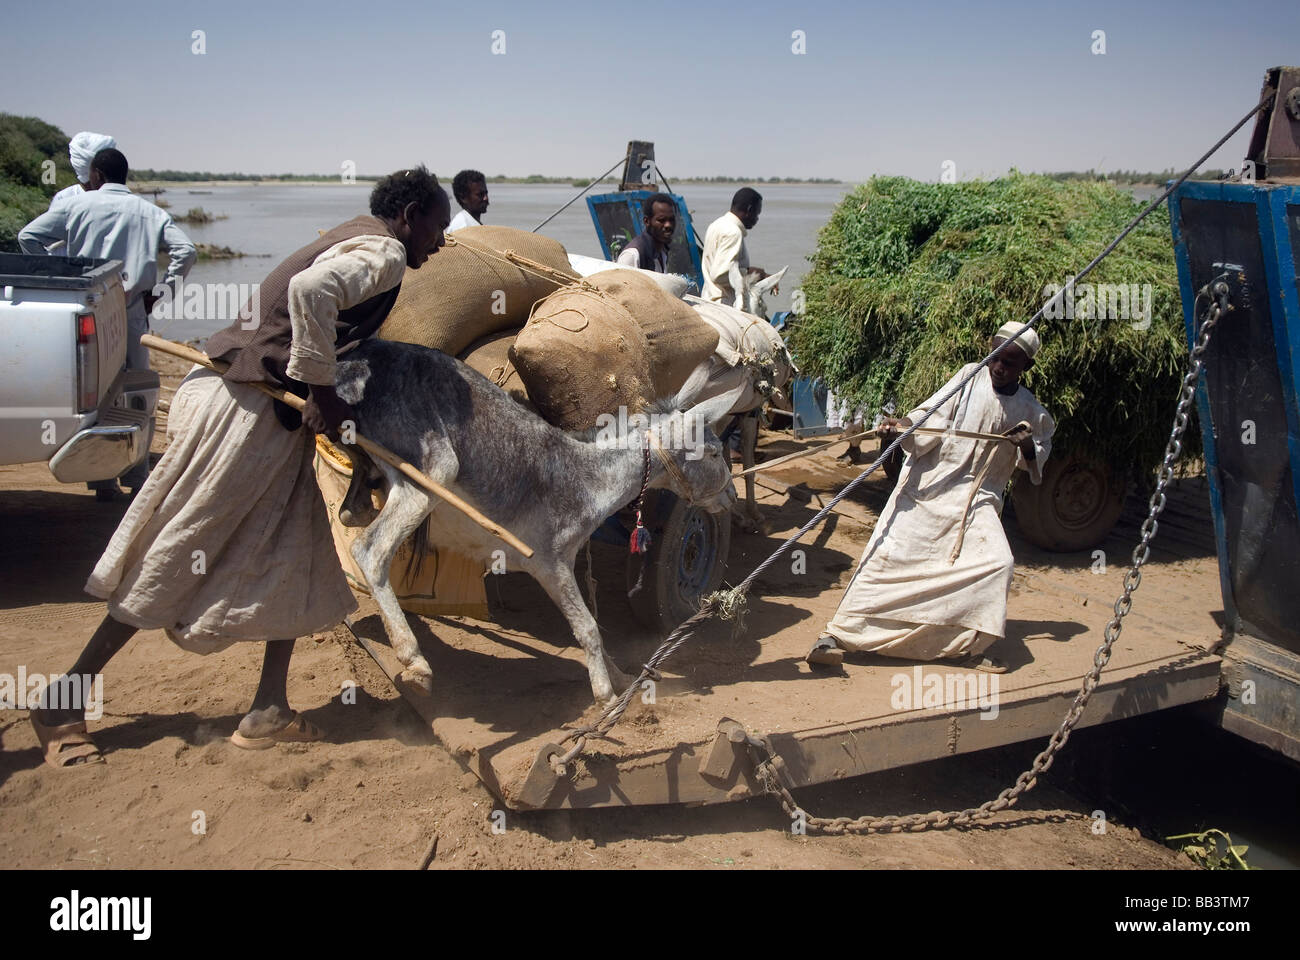 A reluctant donkey begins a voyage across the Nile in northern Sudan Stock Photo